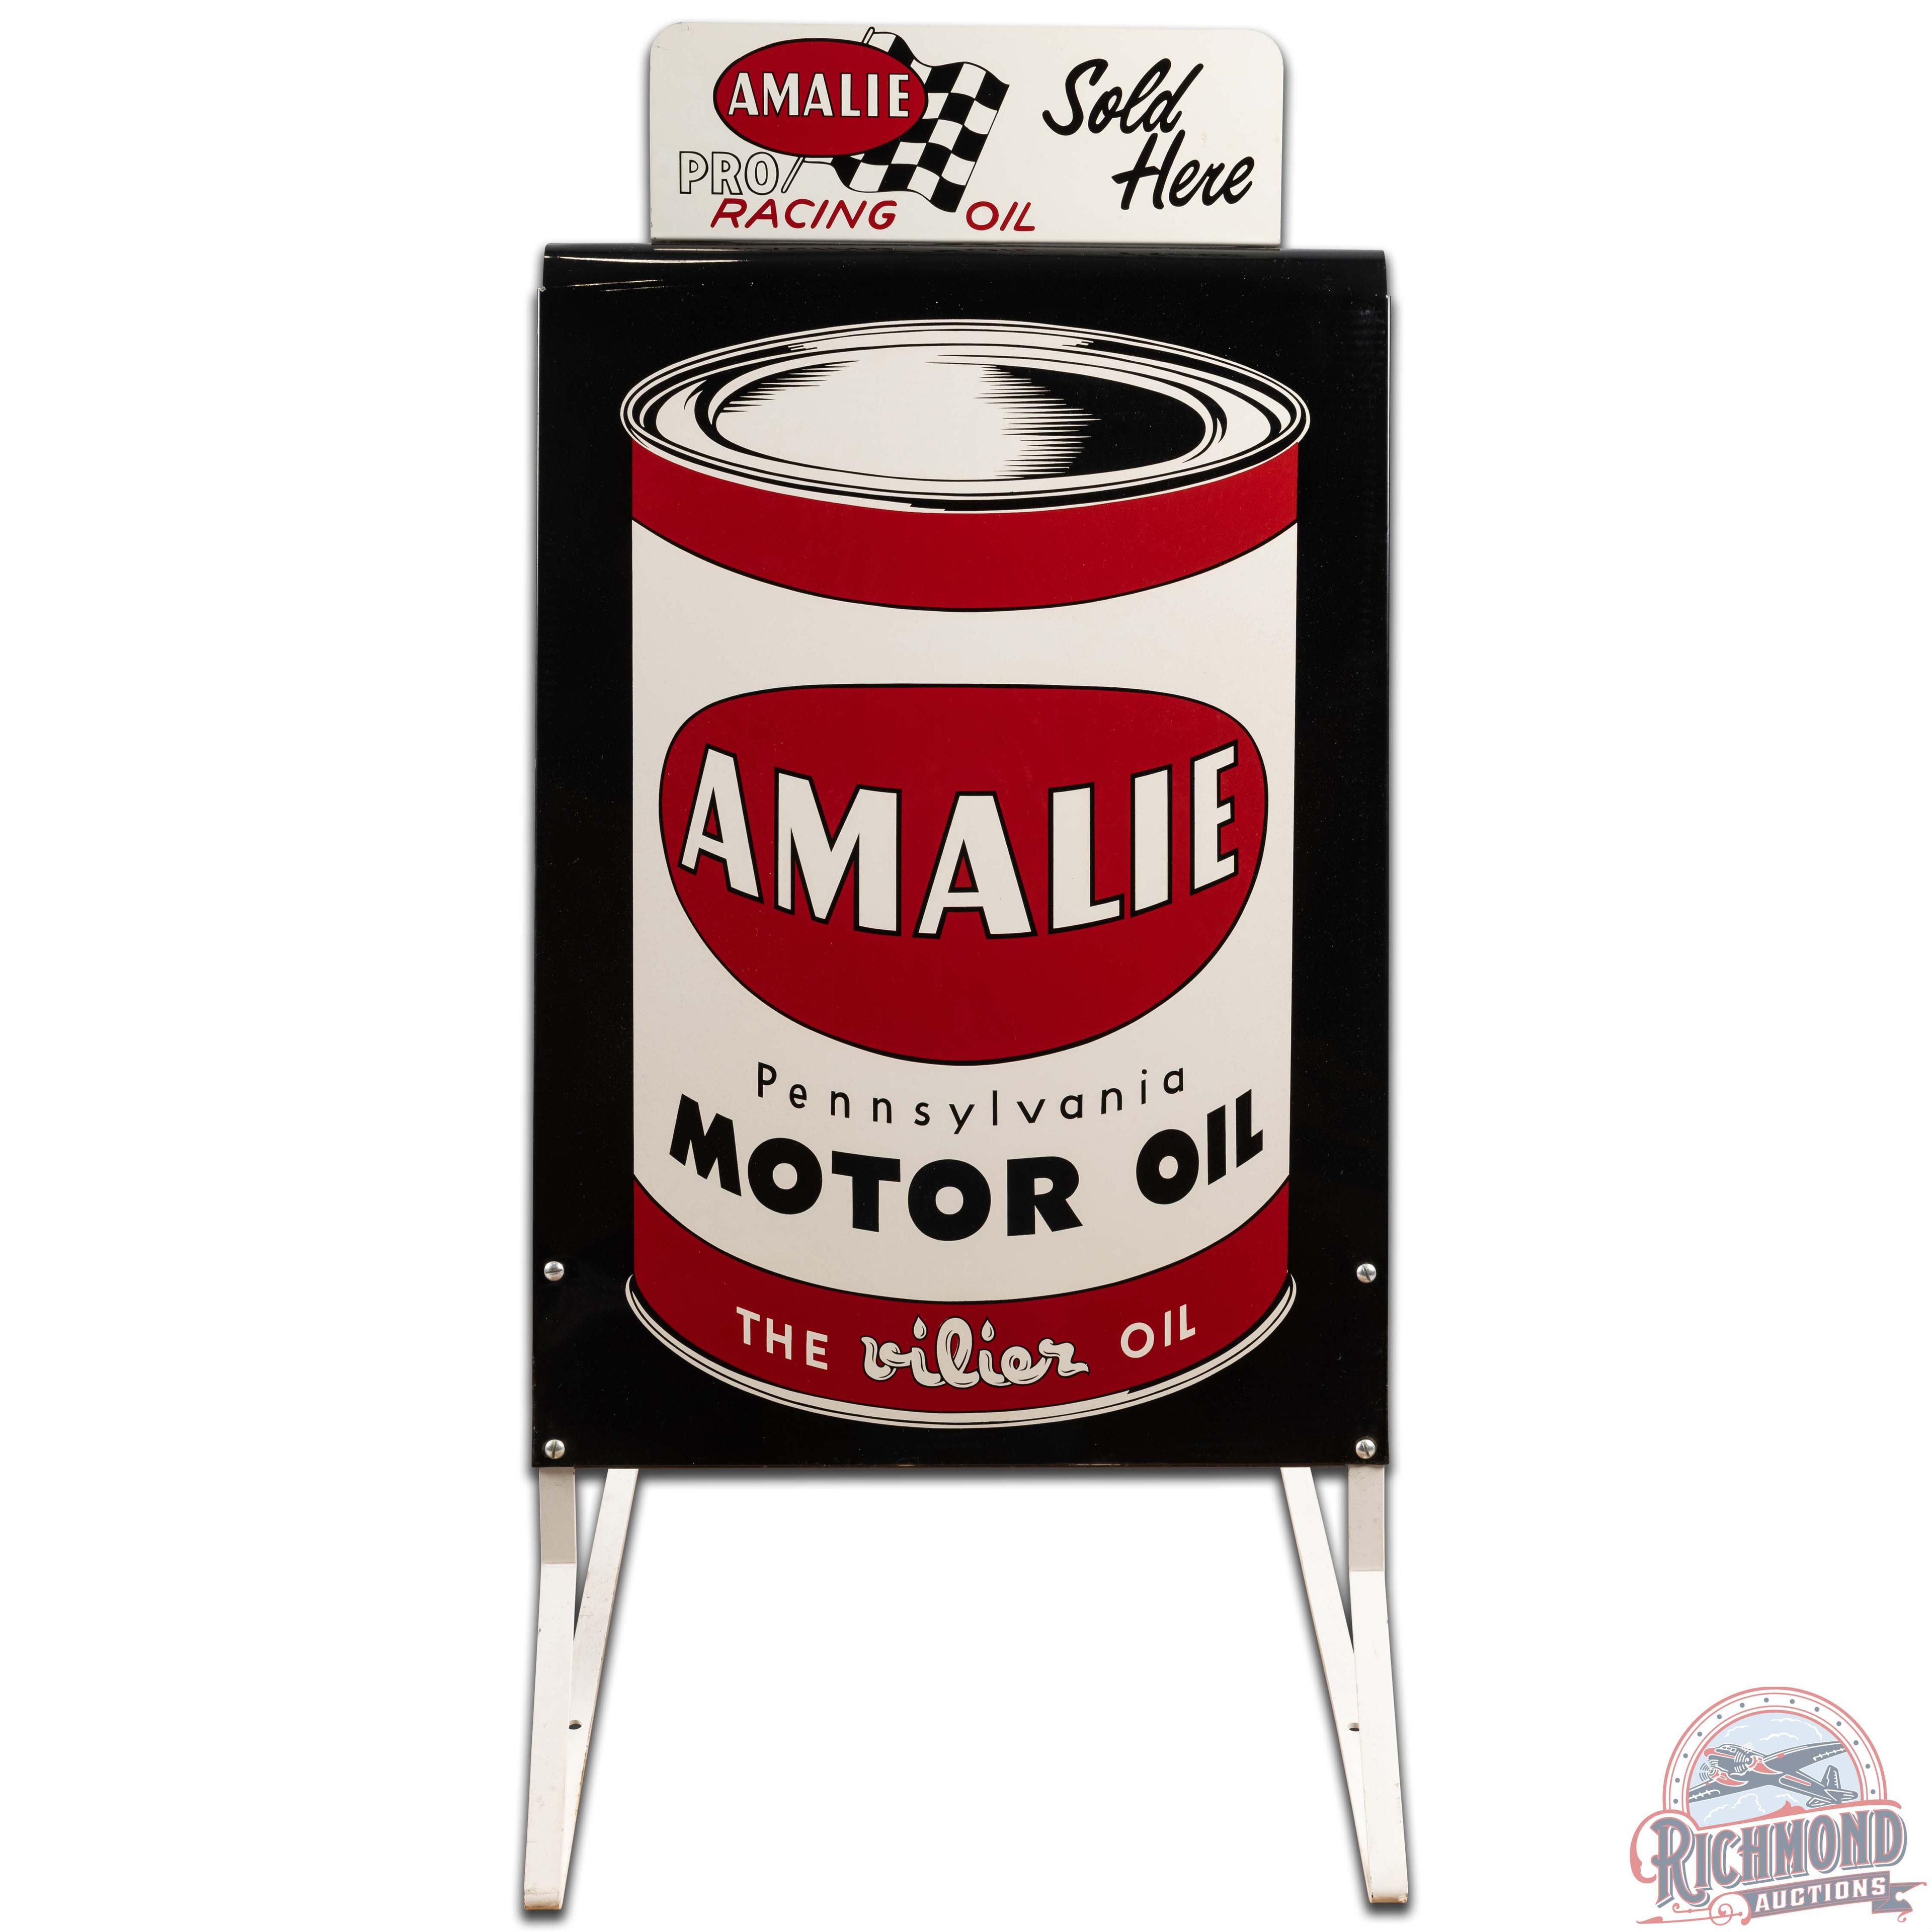 Amalie Motor Oil DS Tin Curb Sign w/ Racing Oil Attachment